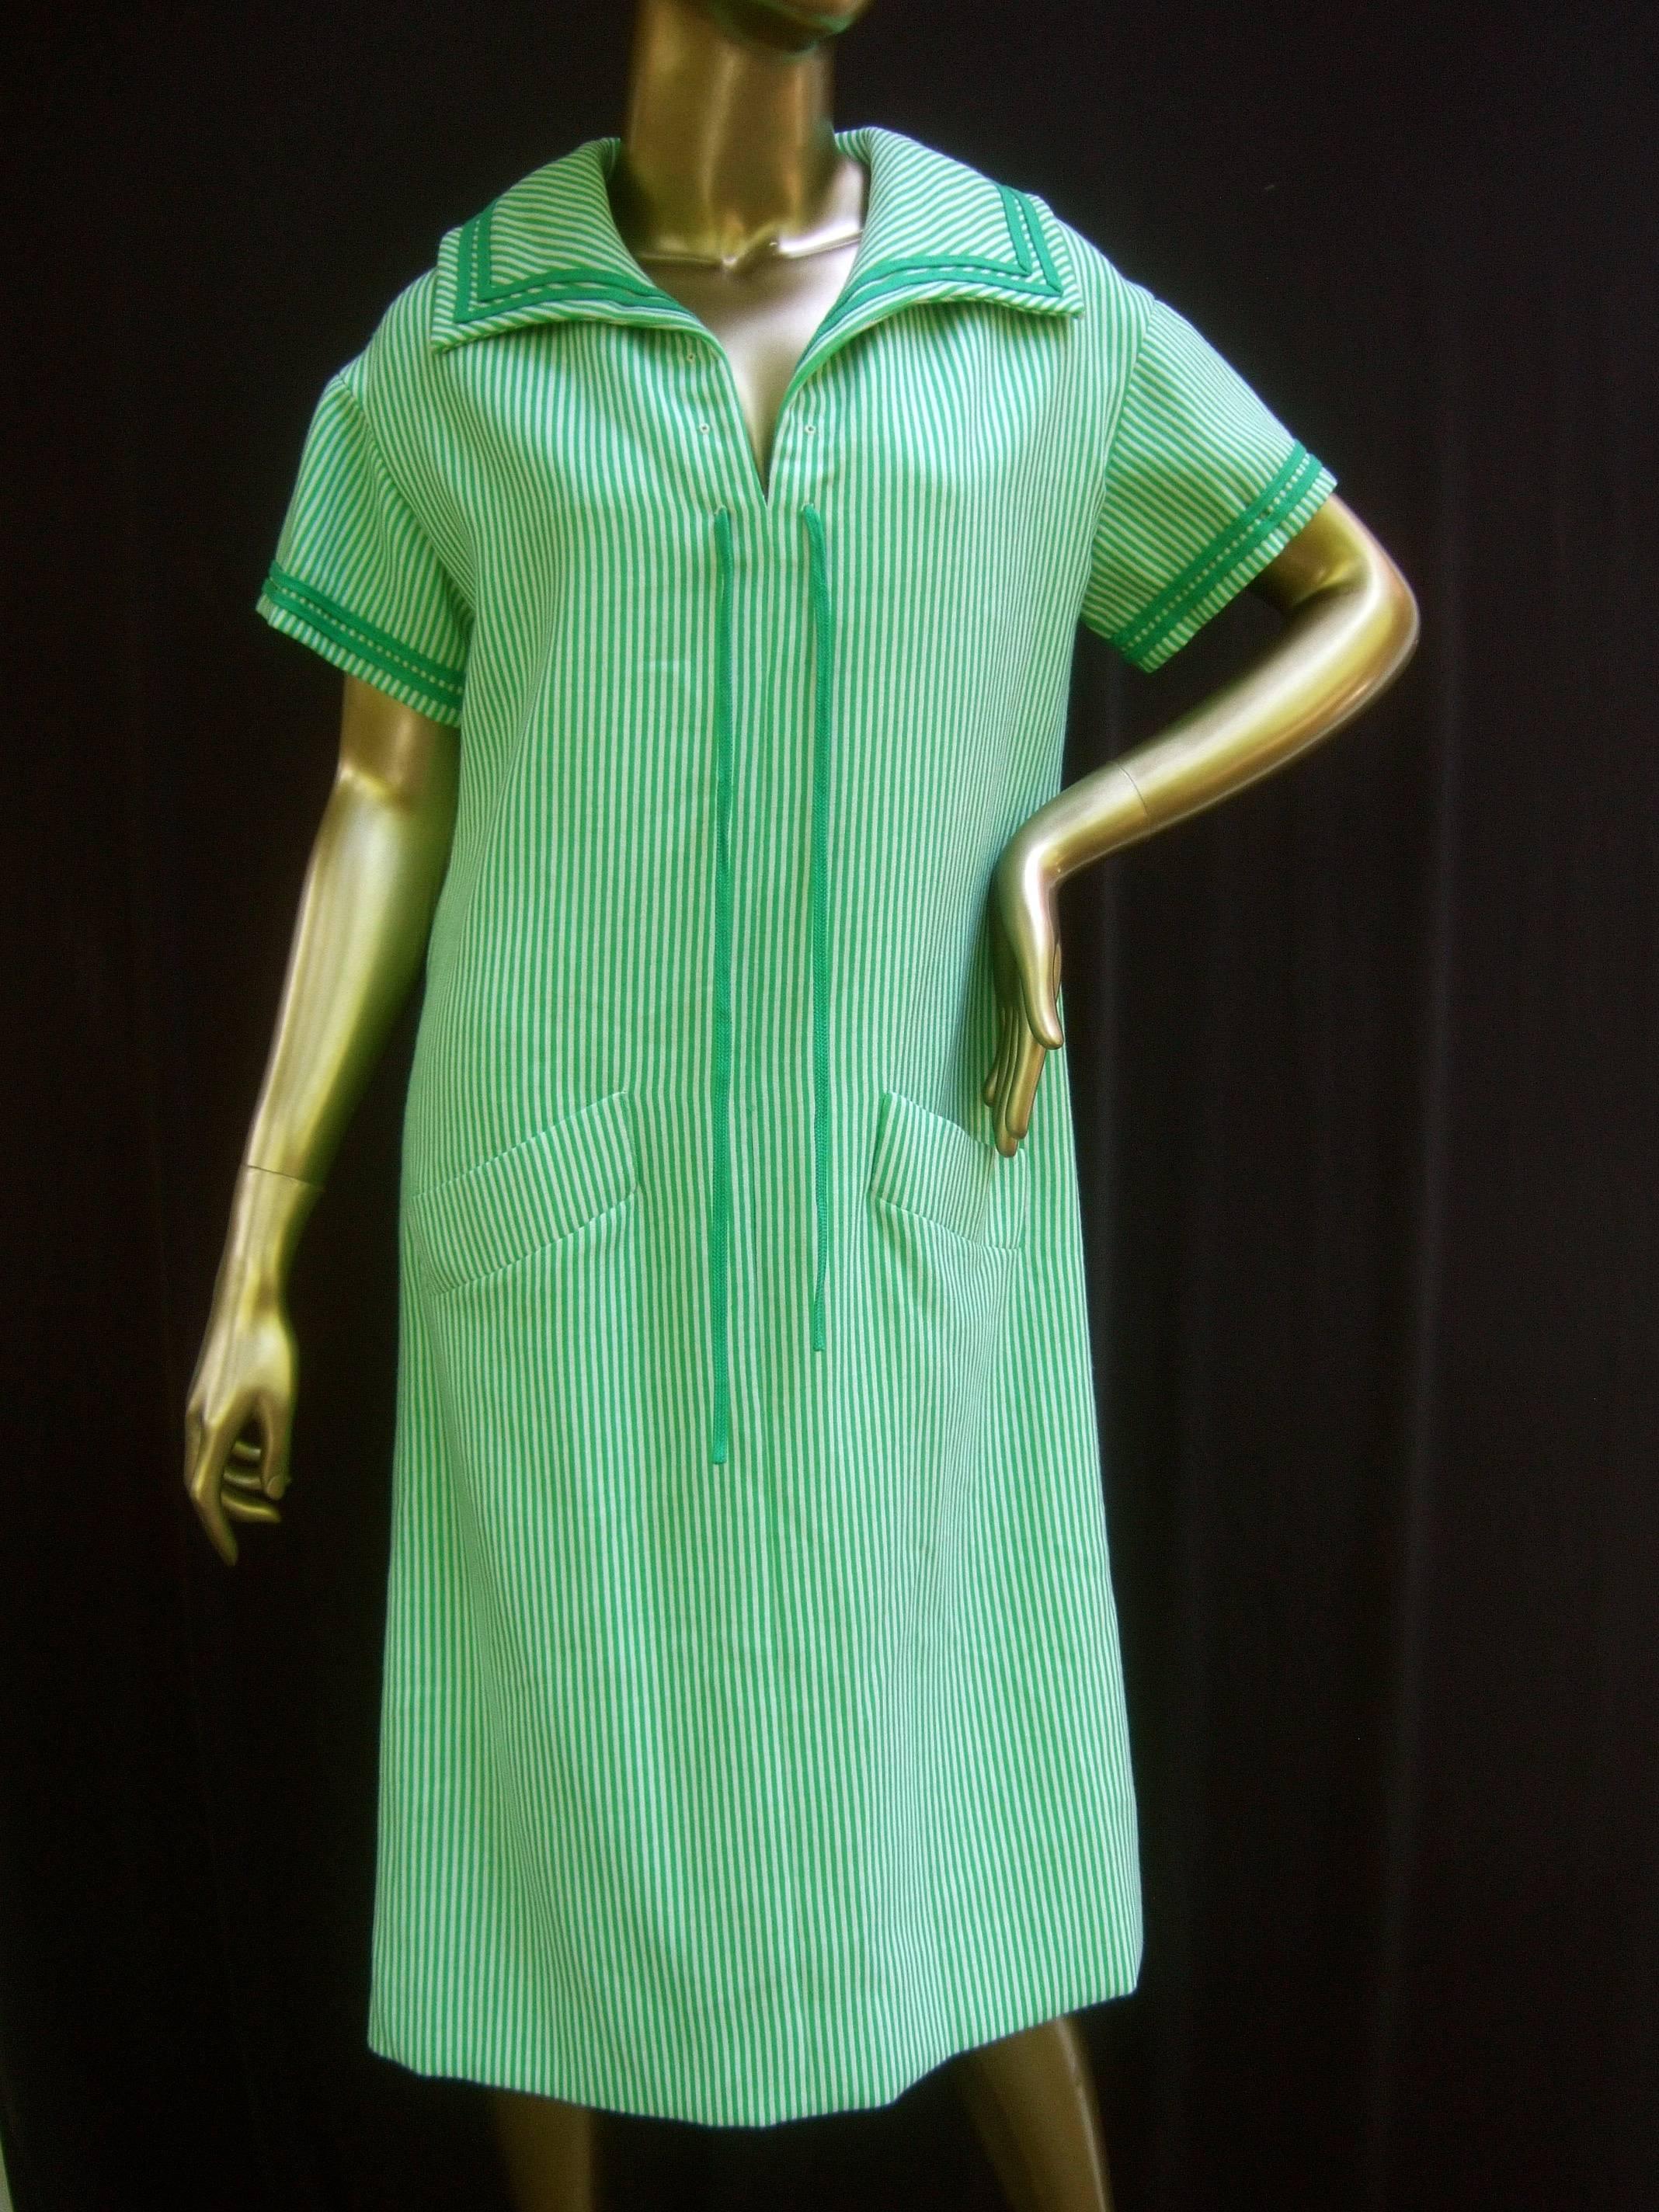 Valentino Boutique Italian vertical green striped wool dress c 1970s
The crisp summer / resort style sac dress is designed 
with contiguous vertical green and white stripes
in lightweight wool knit fabric 

The wide collar is accented with green